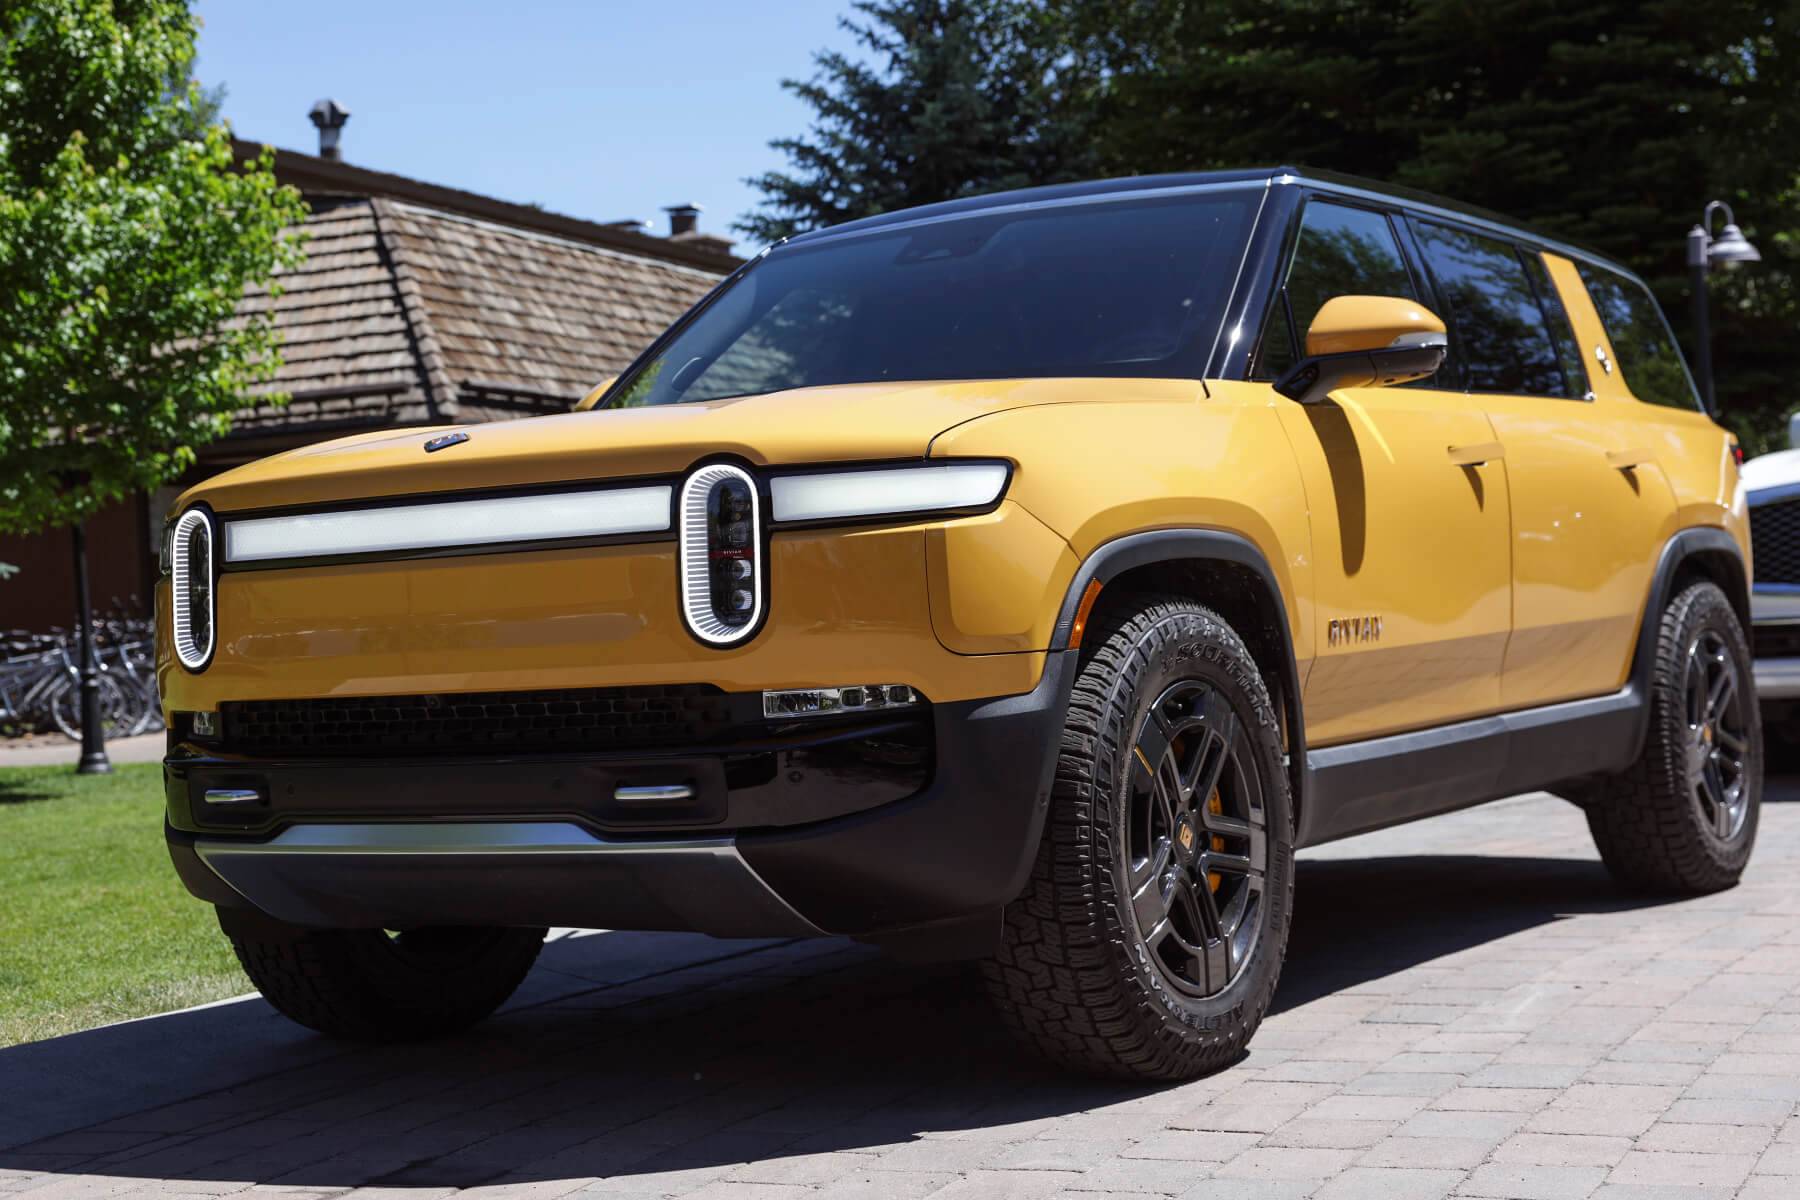 A yellow Rivian R1S electric SUV sits in front a green lawn under midday sun.